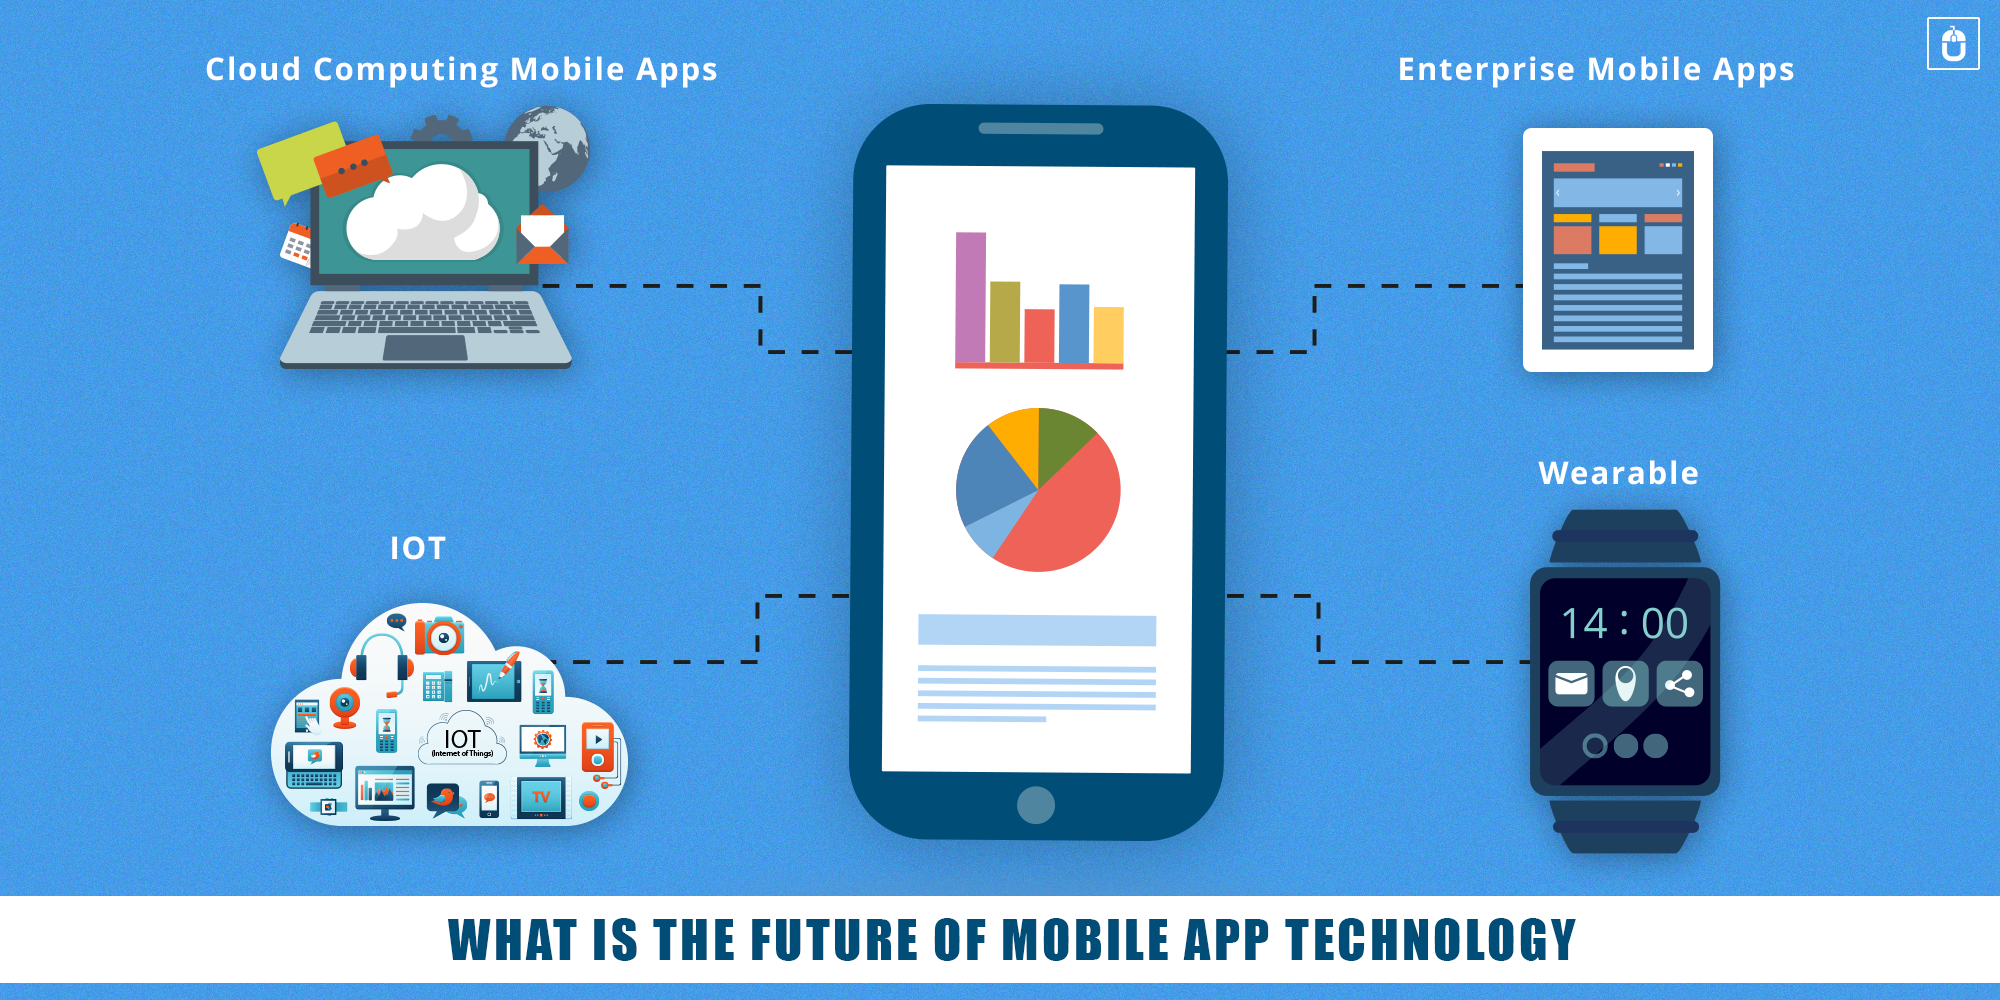 WHAT IS THE FUTURE OF MOBILE APP TECHNOLOGY